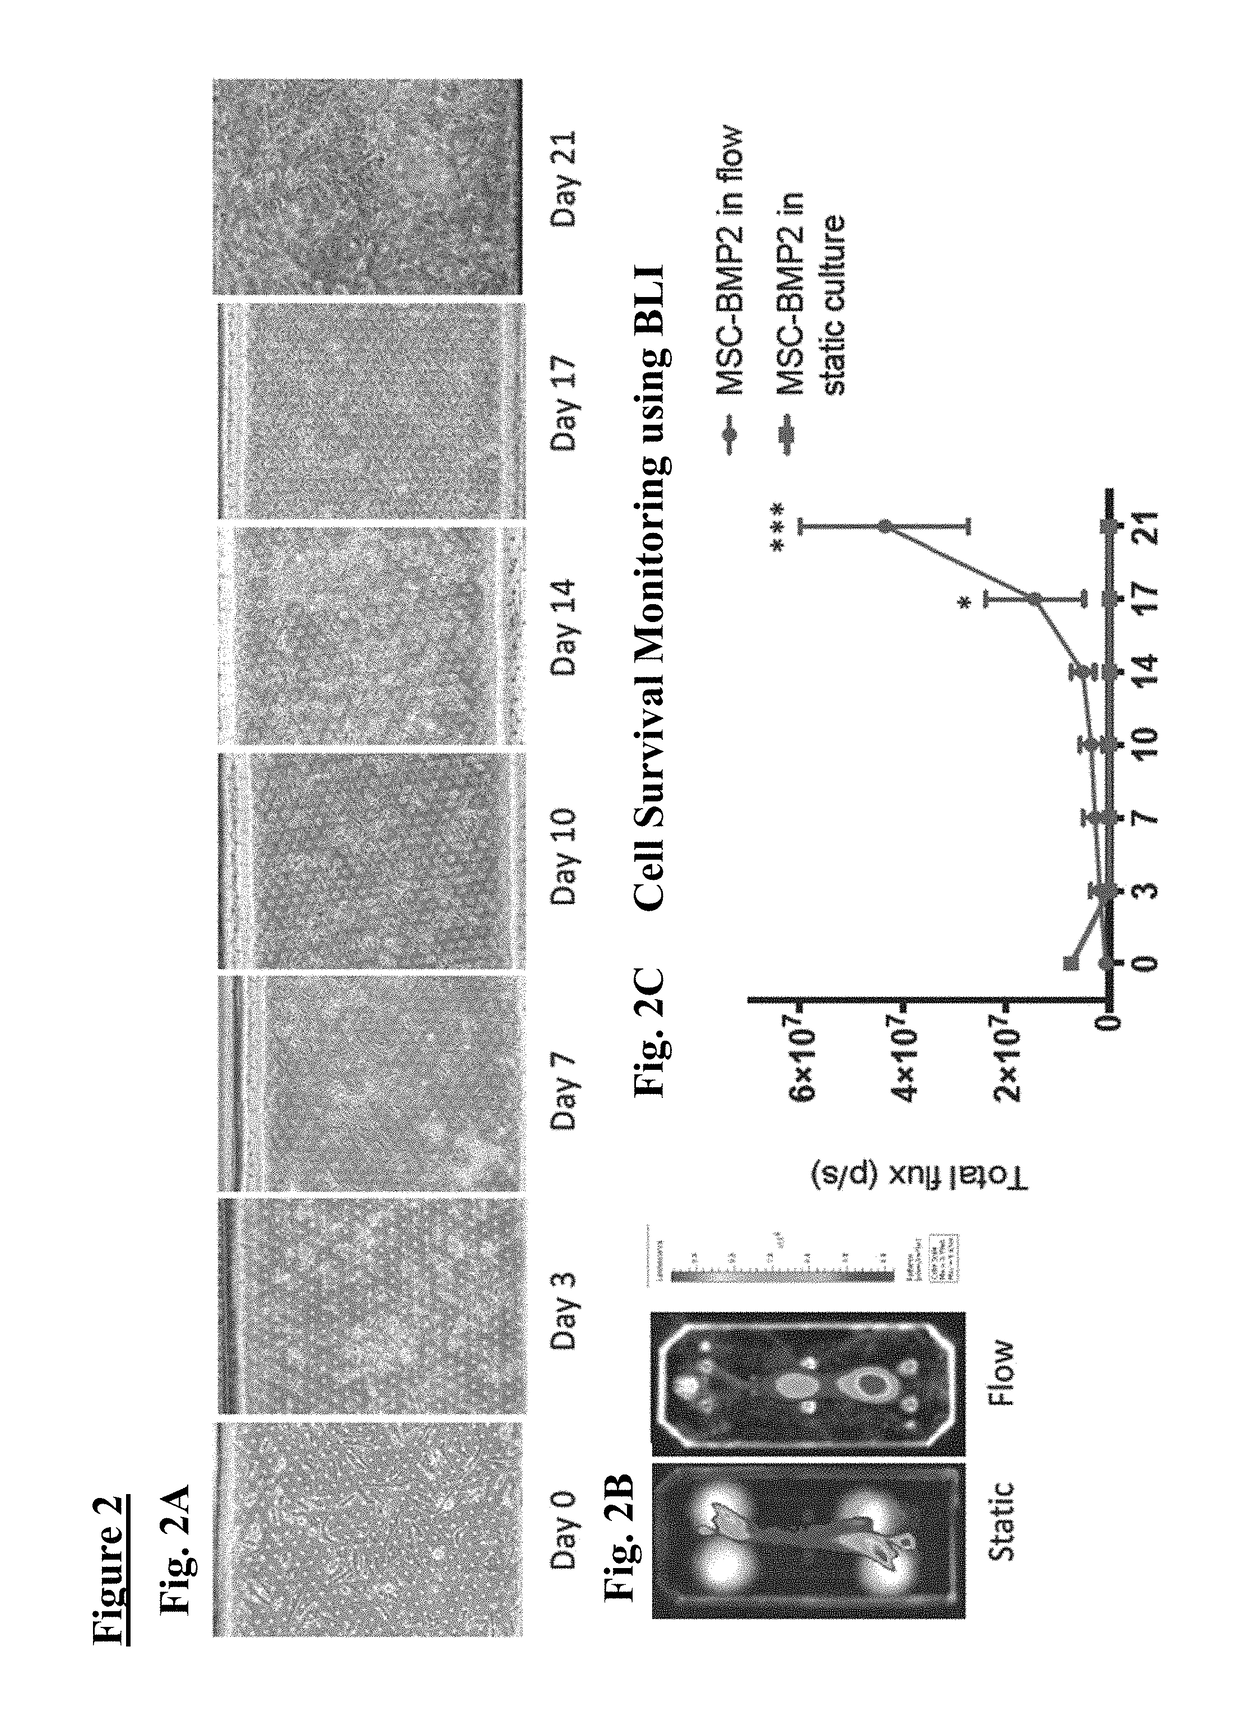 Method of osteogenic differentiation in microfluidic tissue culture systems